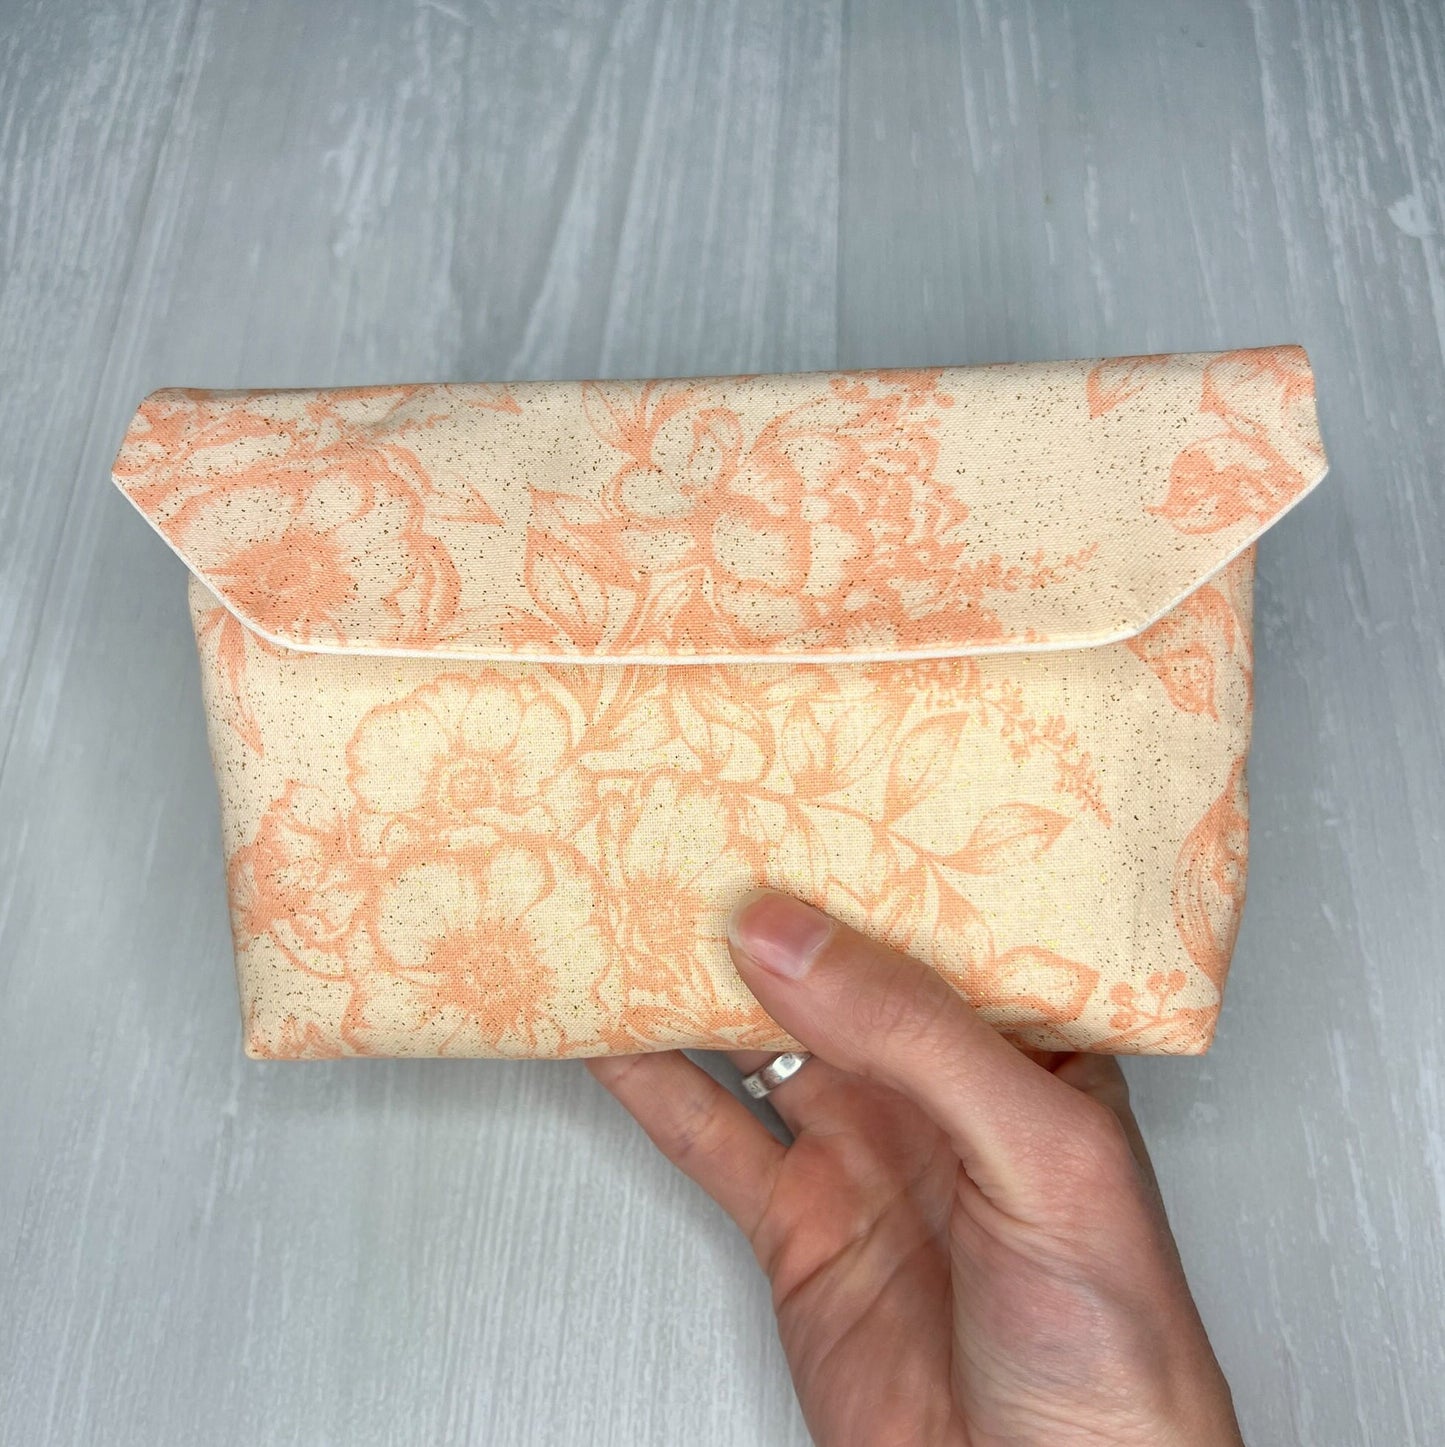 Floral Magnetic Clasp Tarot Clutch Pouch, Peach Fold Over Tarot Pouch, Tarot Reading Gifts Supplies & Accessories, Tarot Card Storage Holder